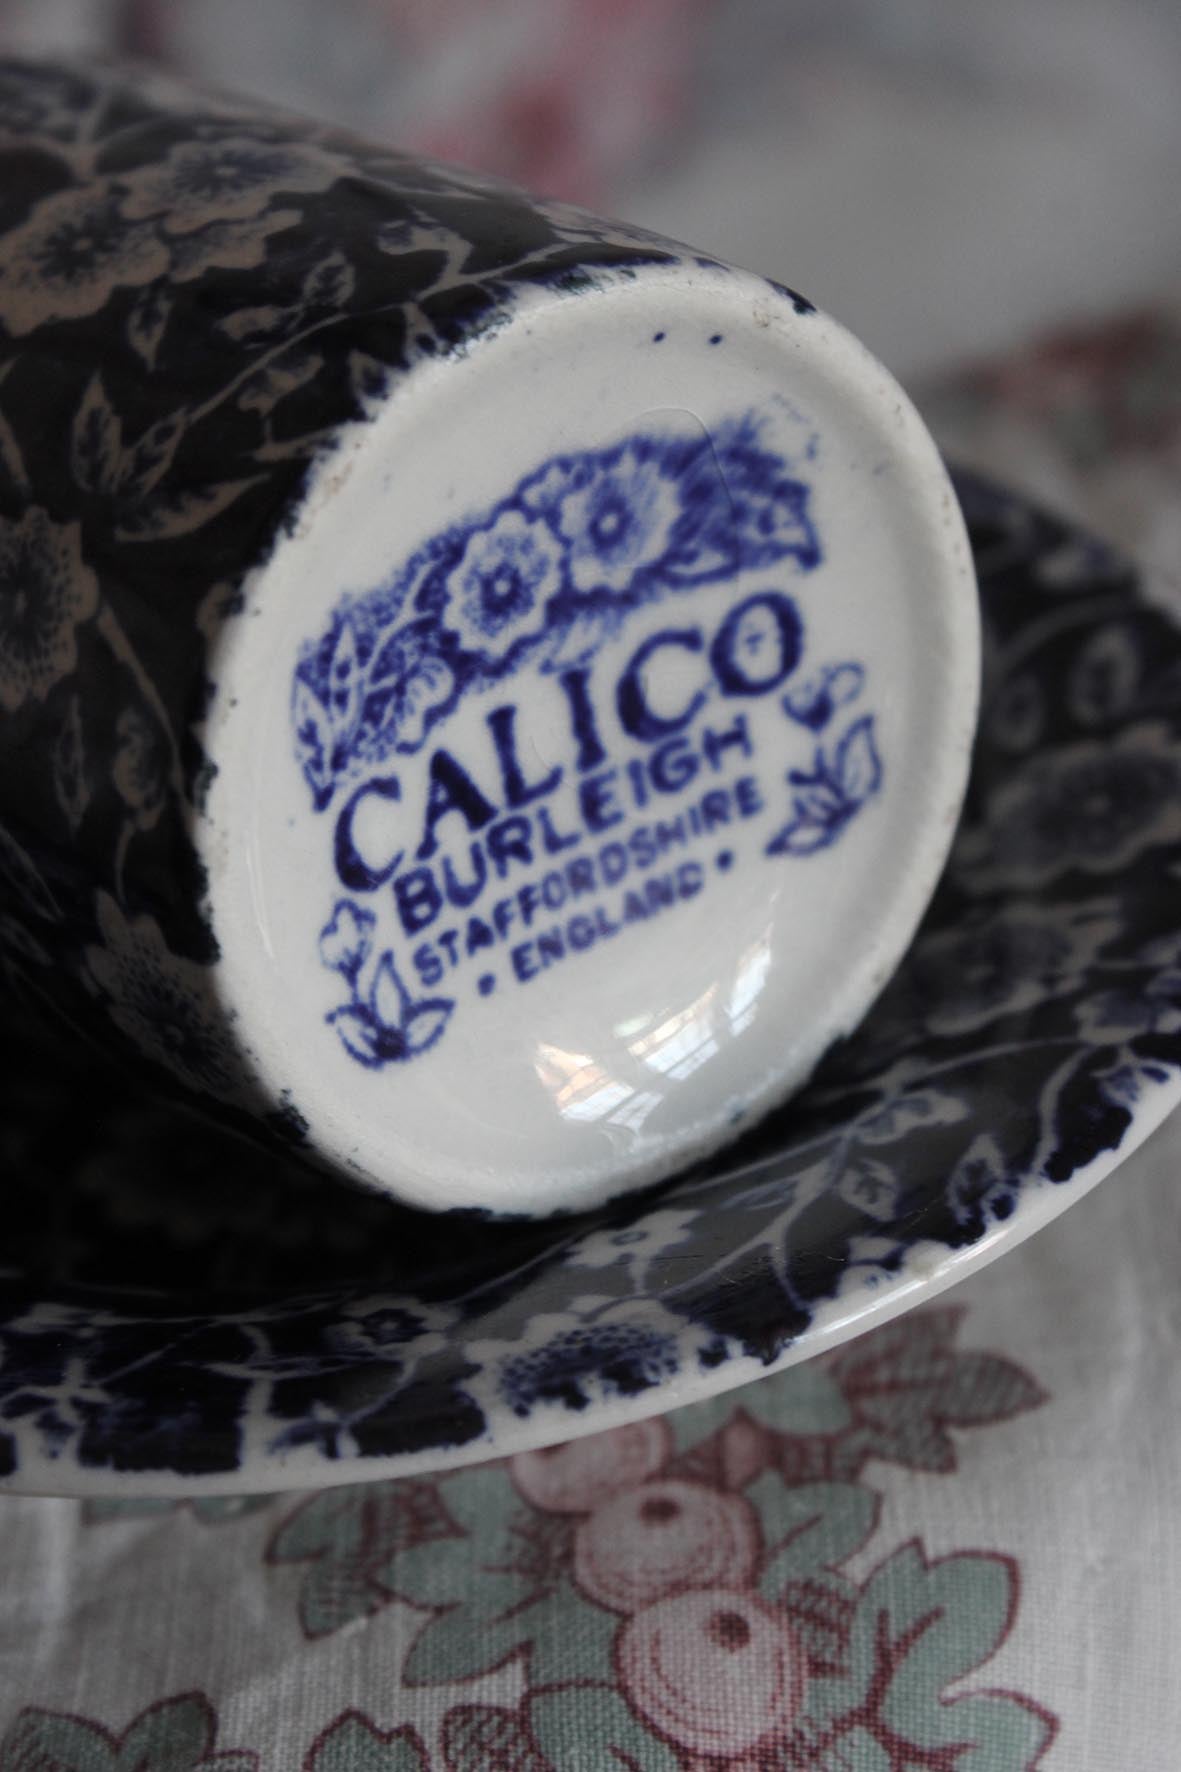 Old Burleigh Coffee Cups & Saucers - Calico